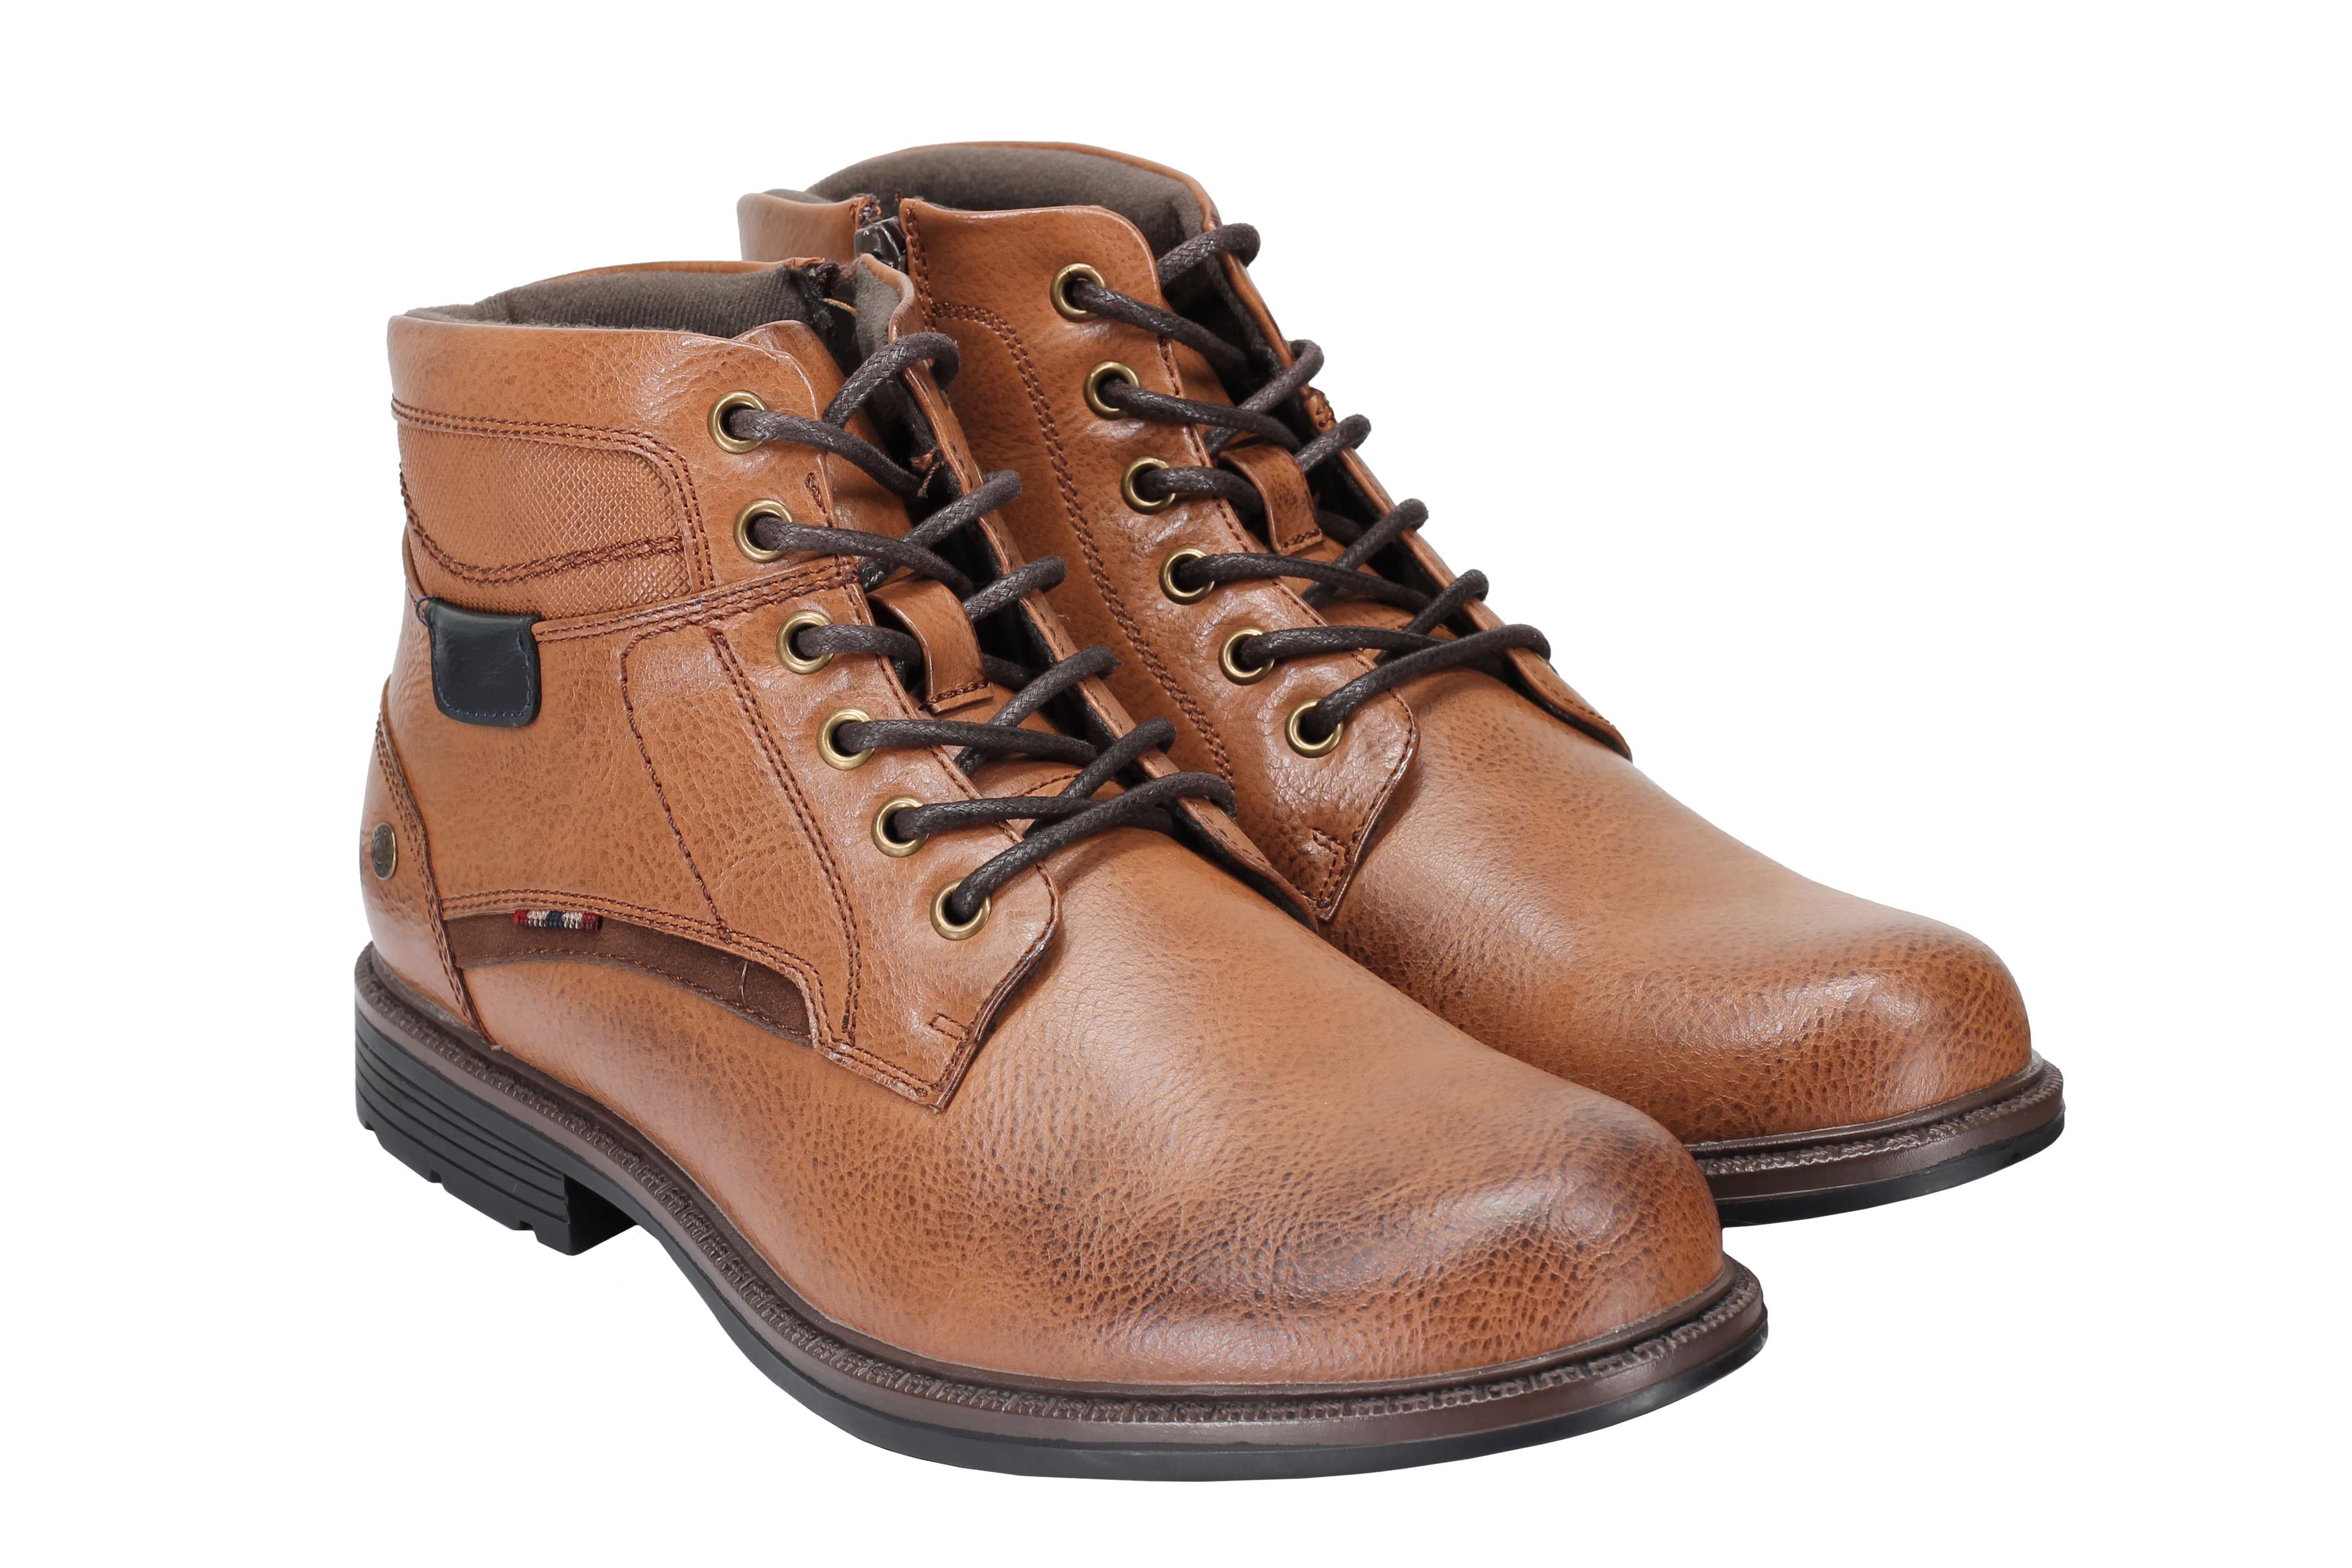 ANKLE LACE UP BOOTS IN TAN, BLACK